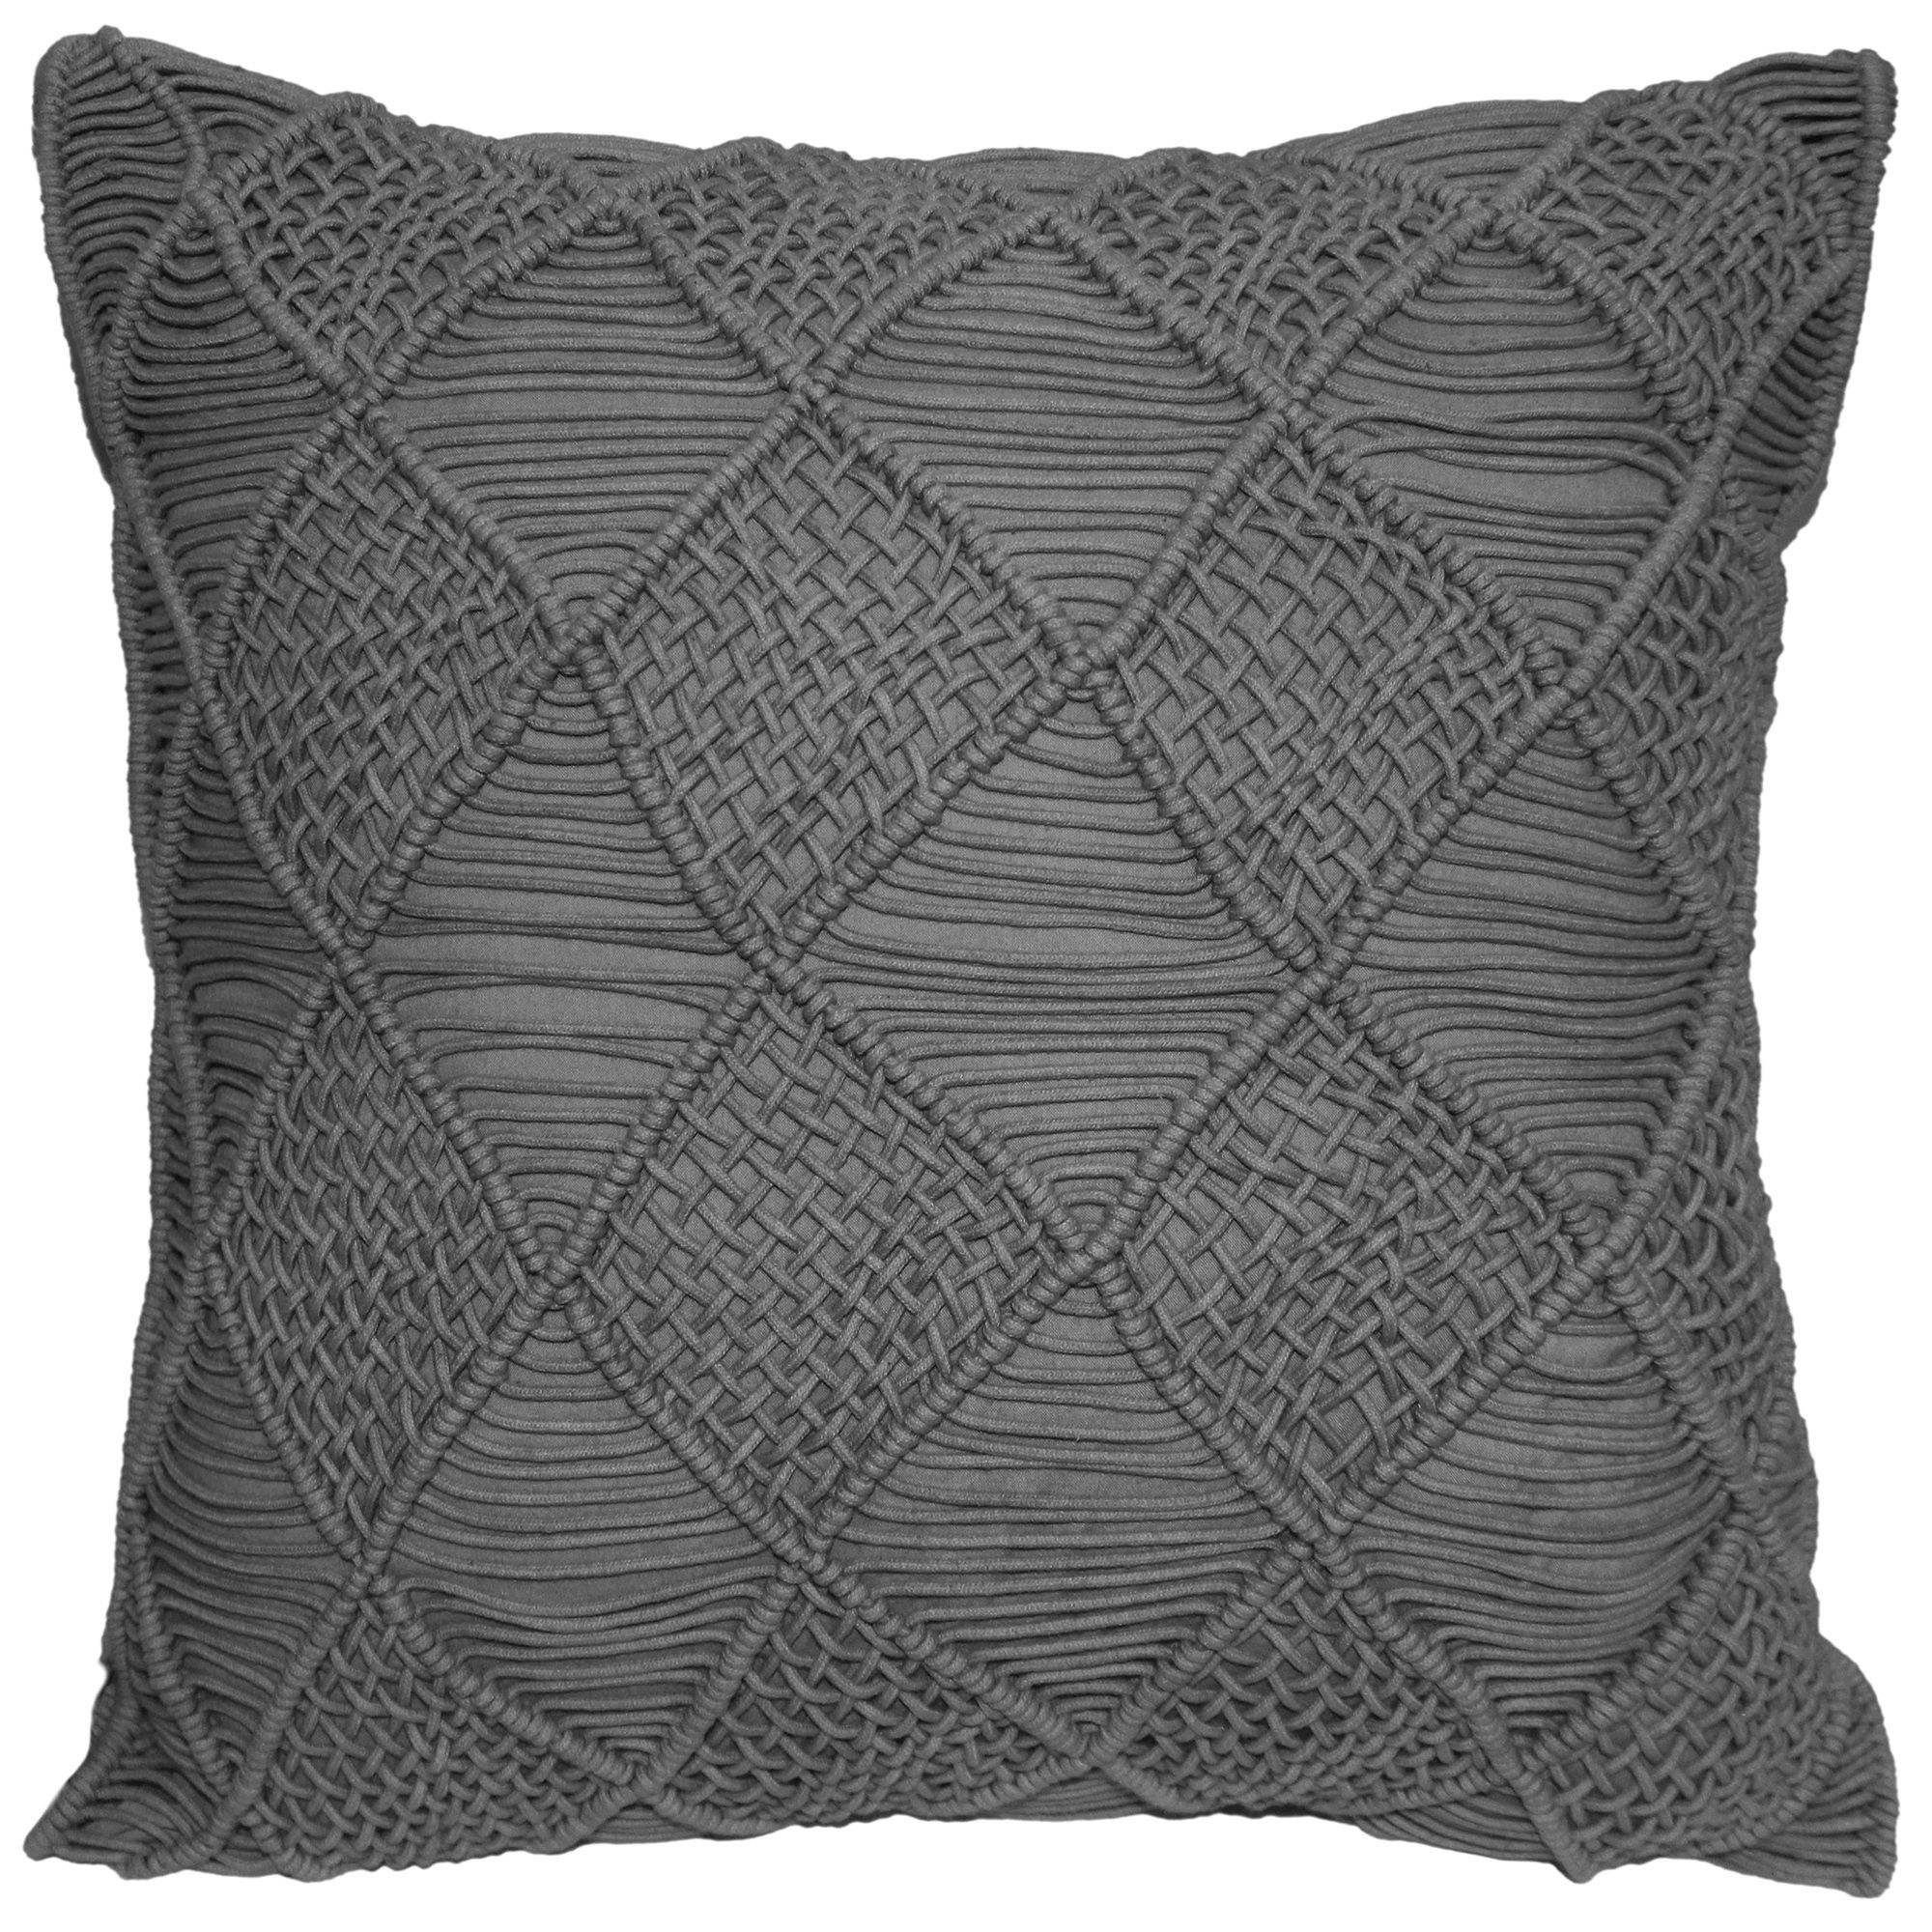 The Holiday Aisle® Ferris Embroidered Cotton Throw Pillow